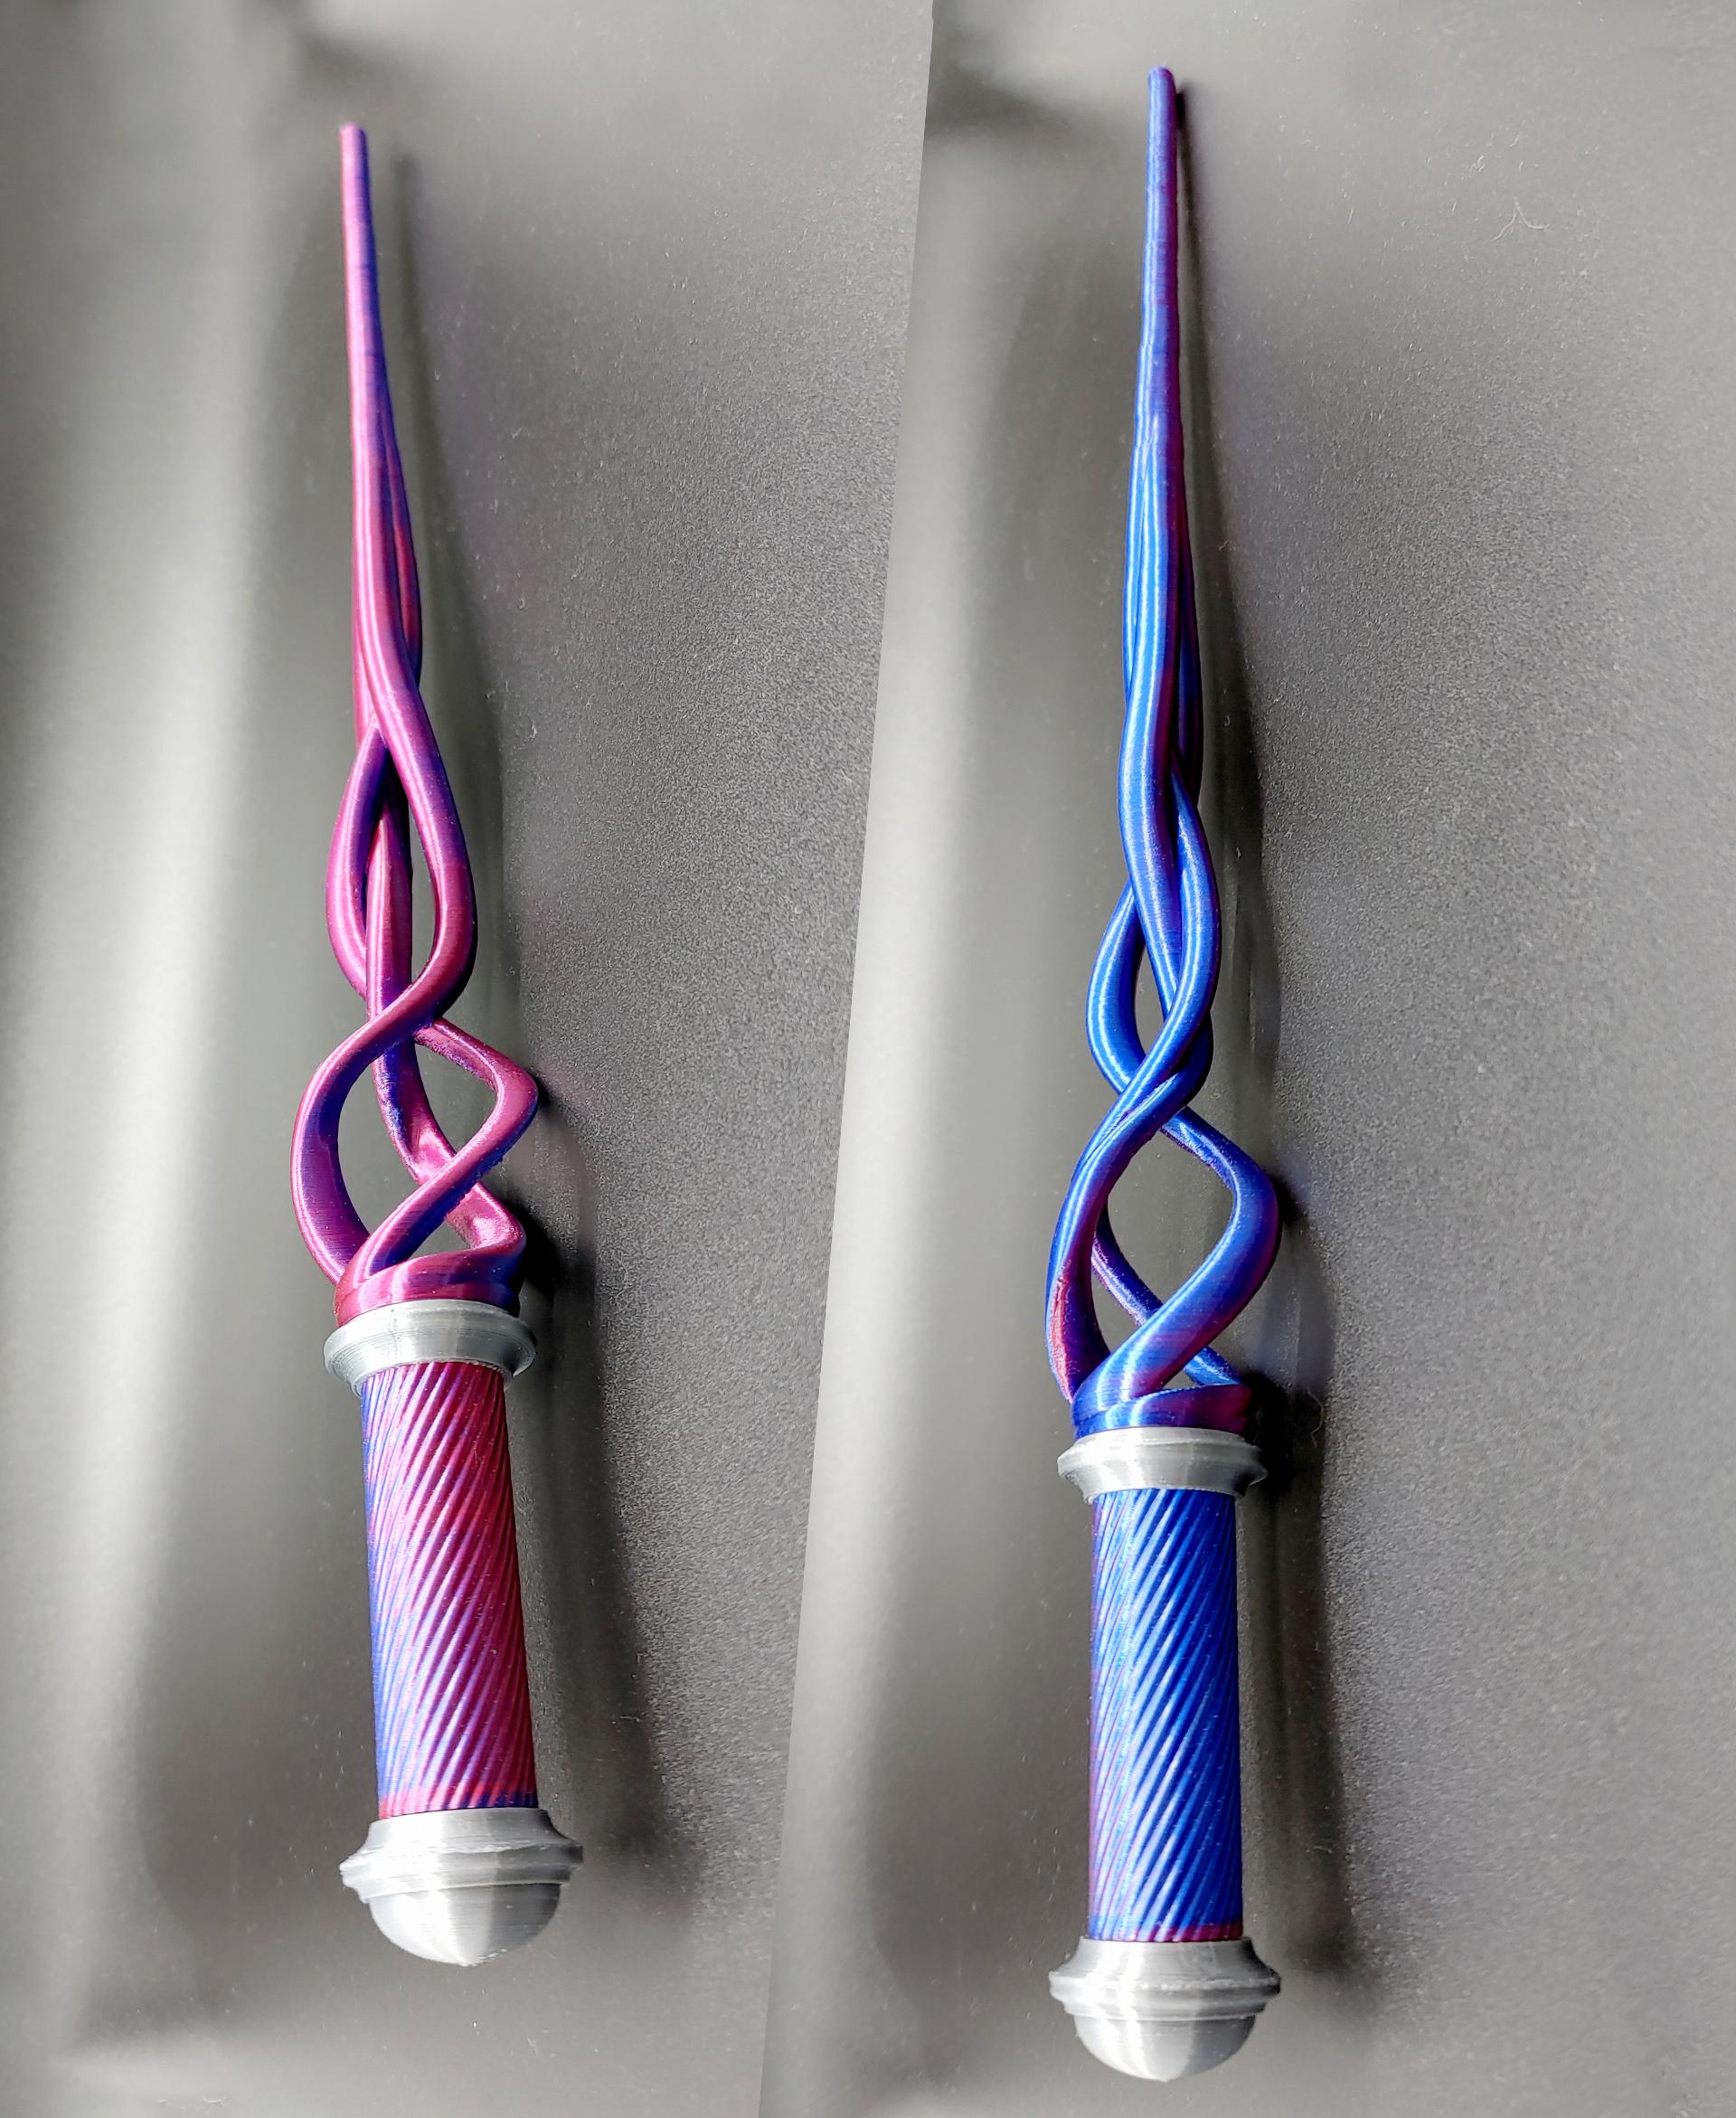 My Wand - My Wand by Bugman_140 in Eryone dual color silk blue and red PLA and PolyMaker Chrome Silk PLA.

(same print shown from two different angles) - 3d model